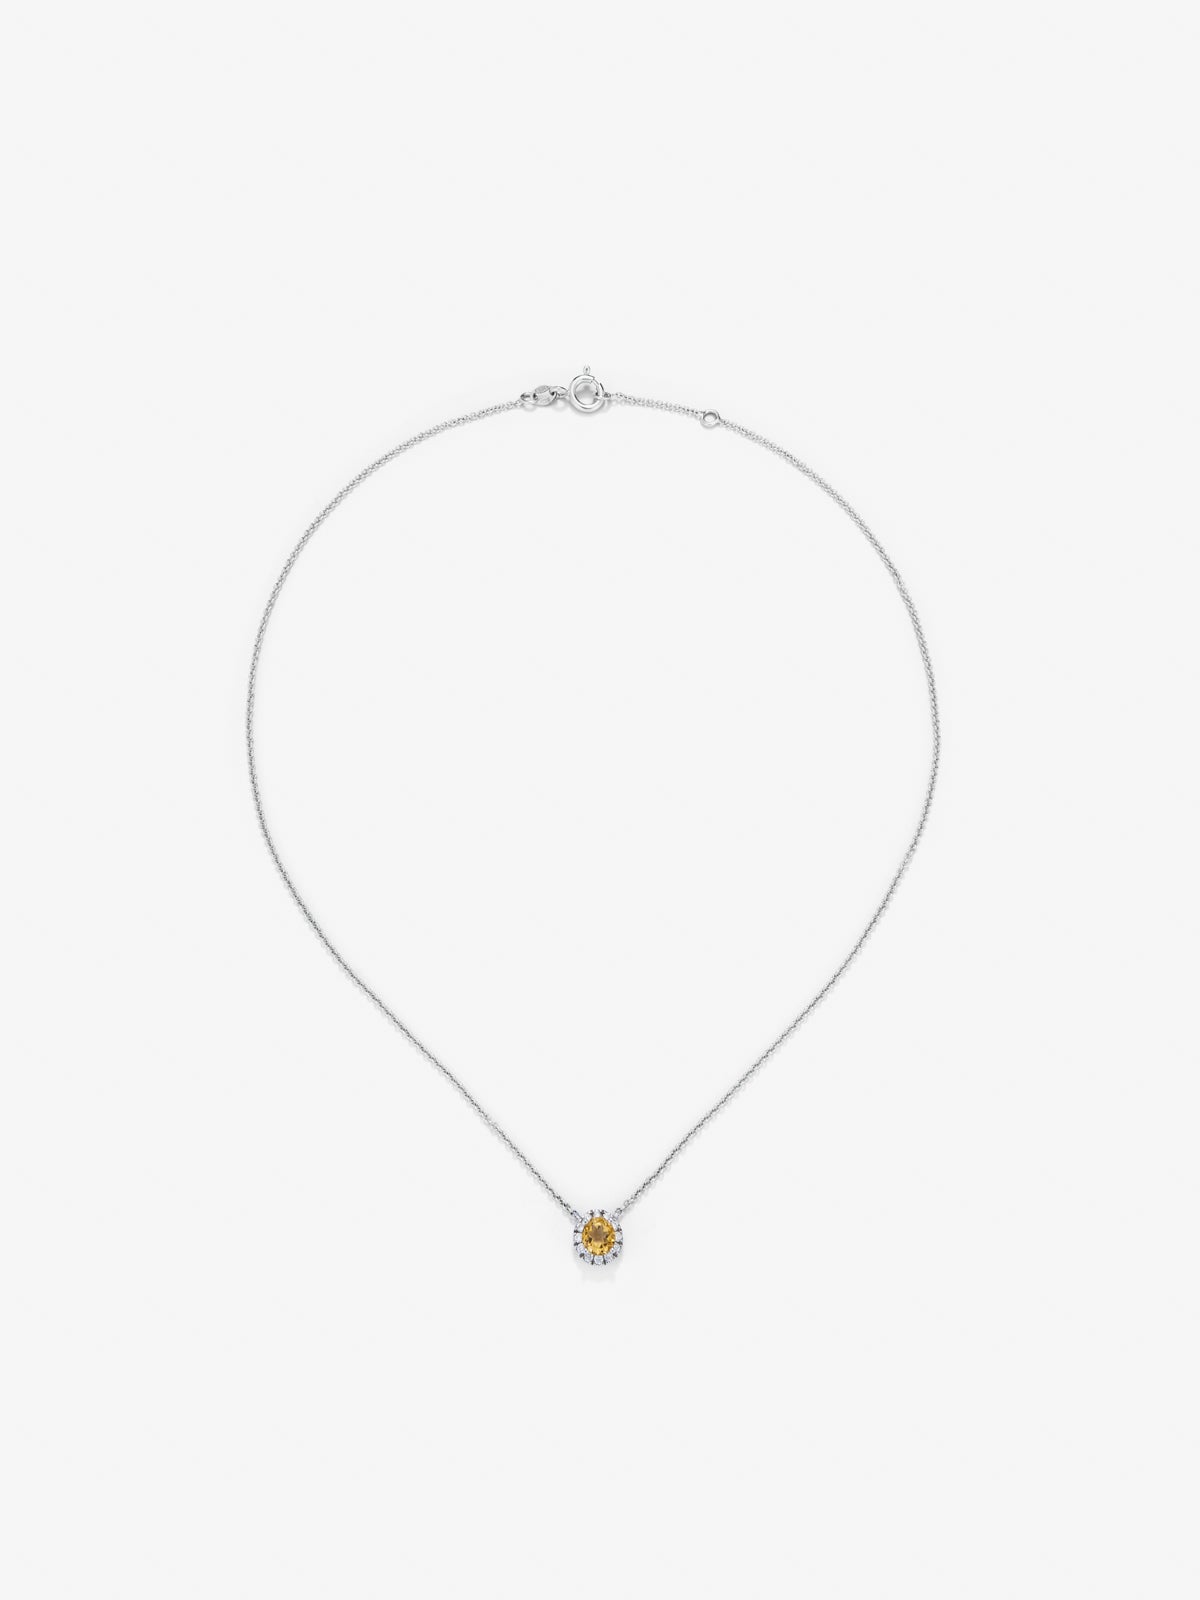 18K white gold pendant with citrine quartz 0.57 cts and diamonds 0.14 cts